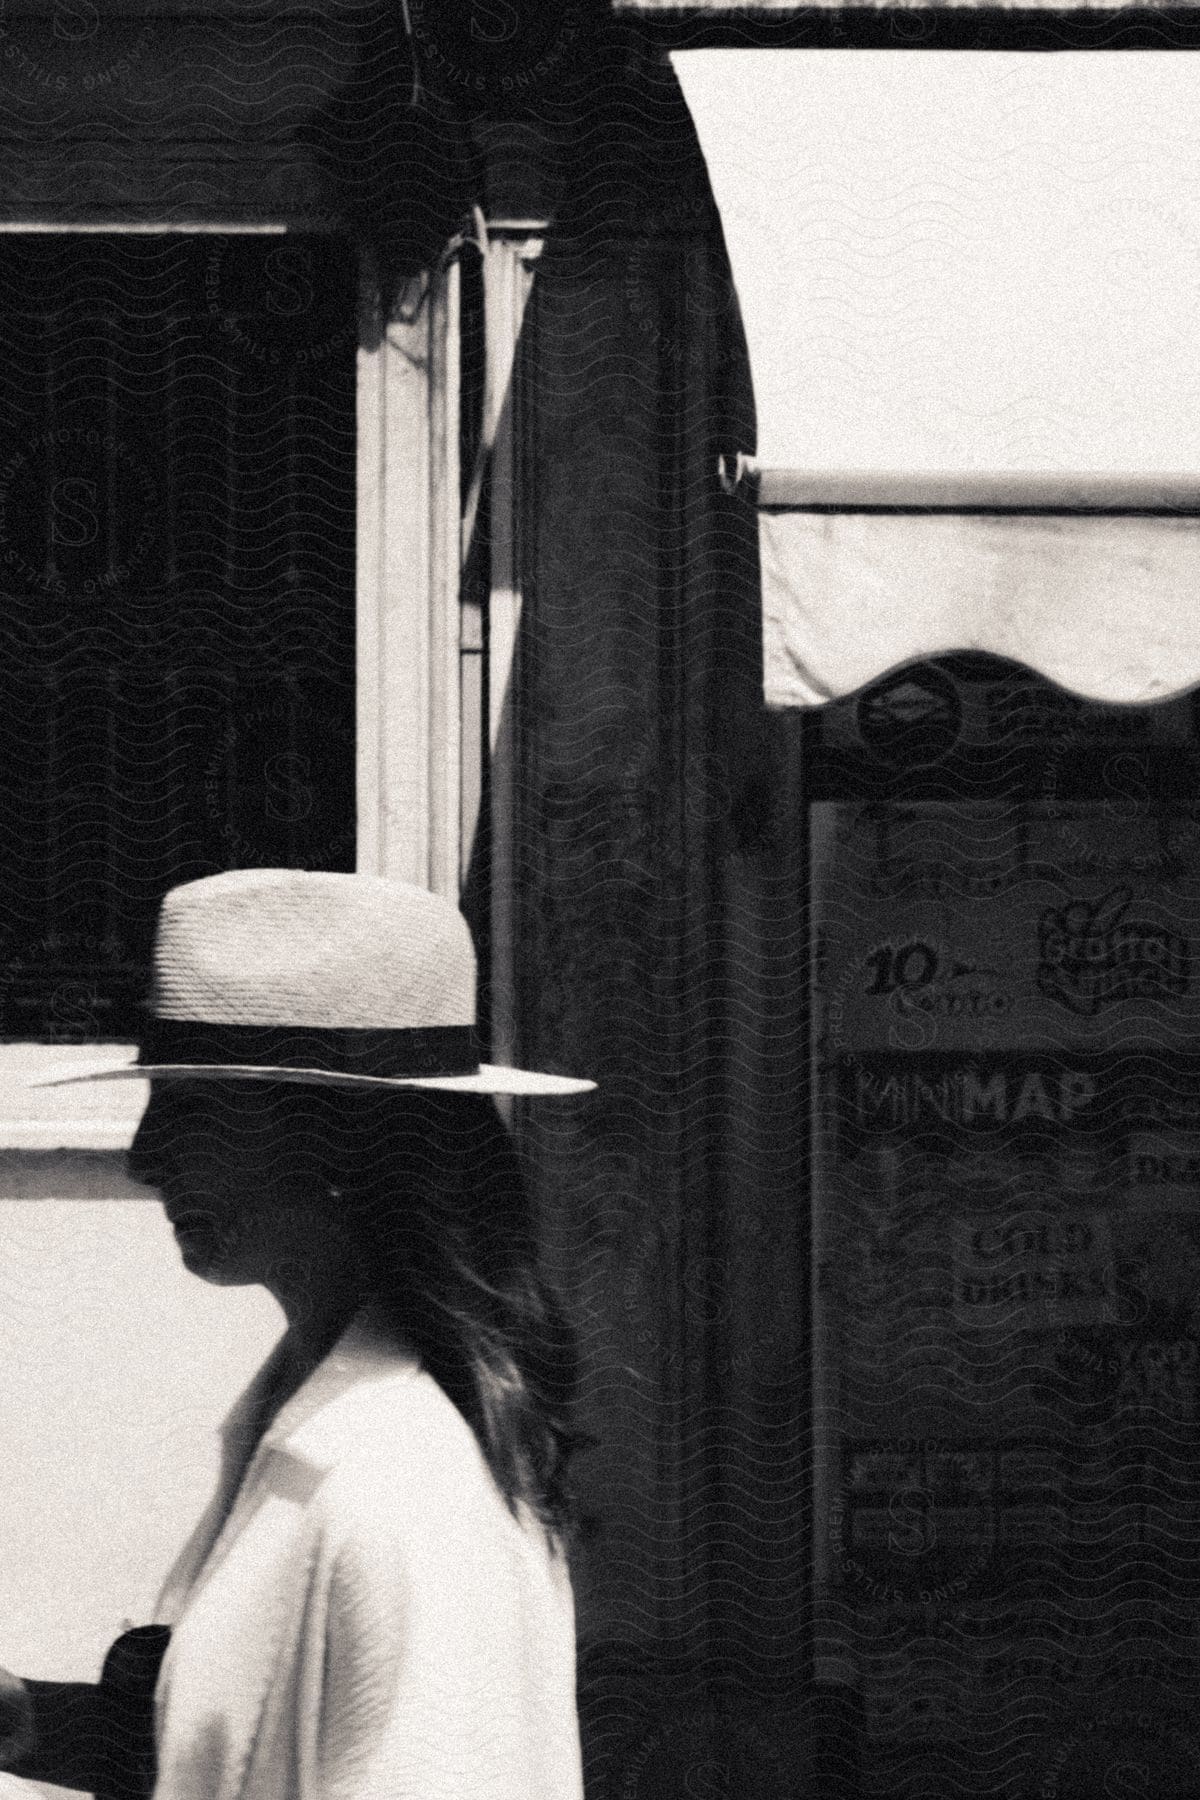 Woman wearing sun hat walks past shop with an awning.